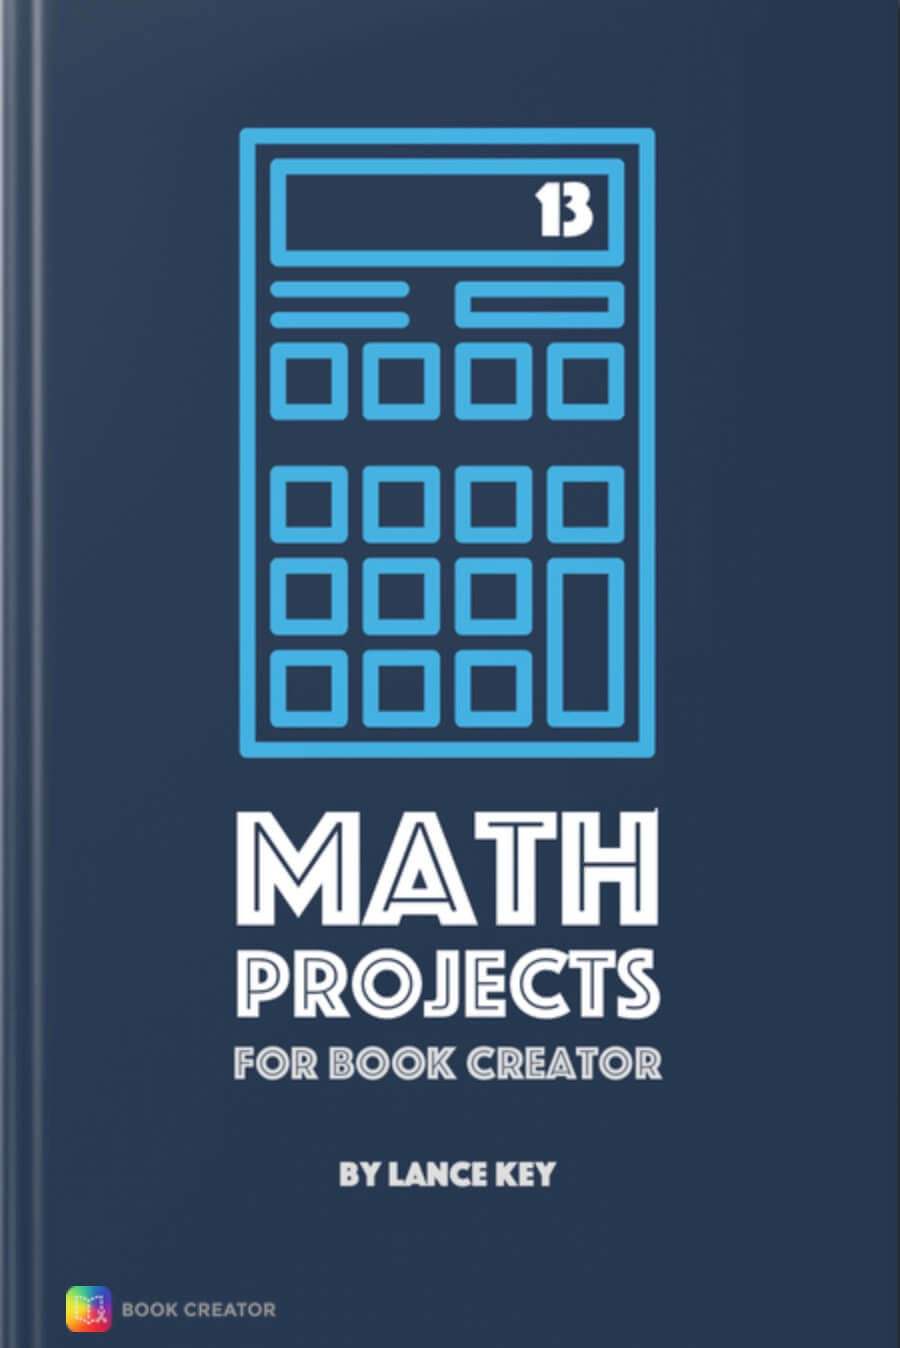 13 Math Projects for Book Creator